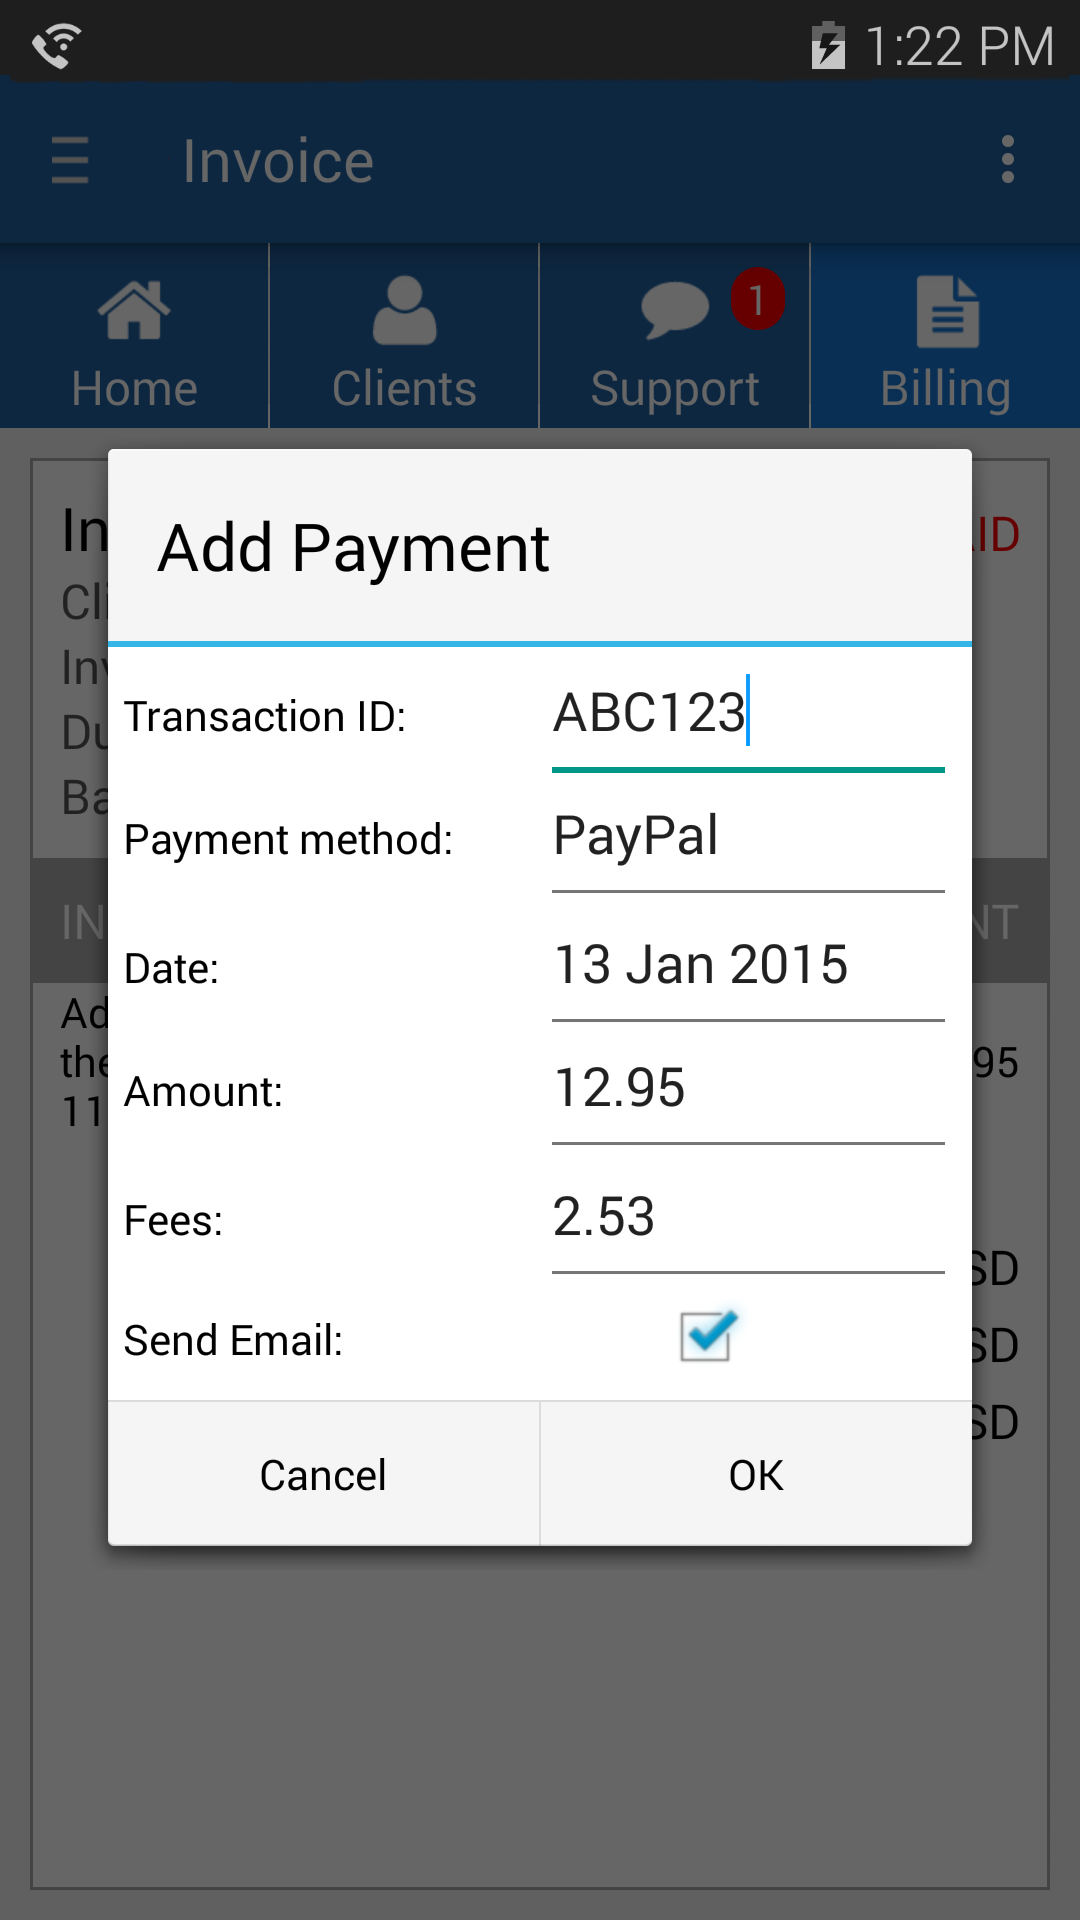 Add Payment